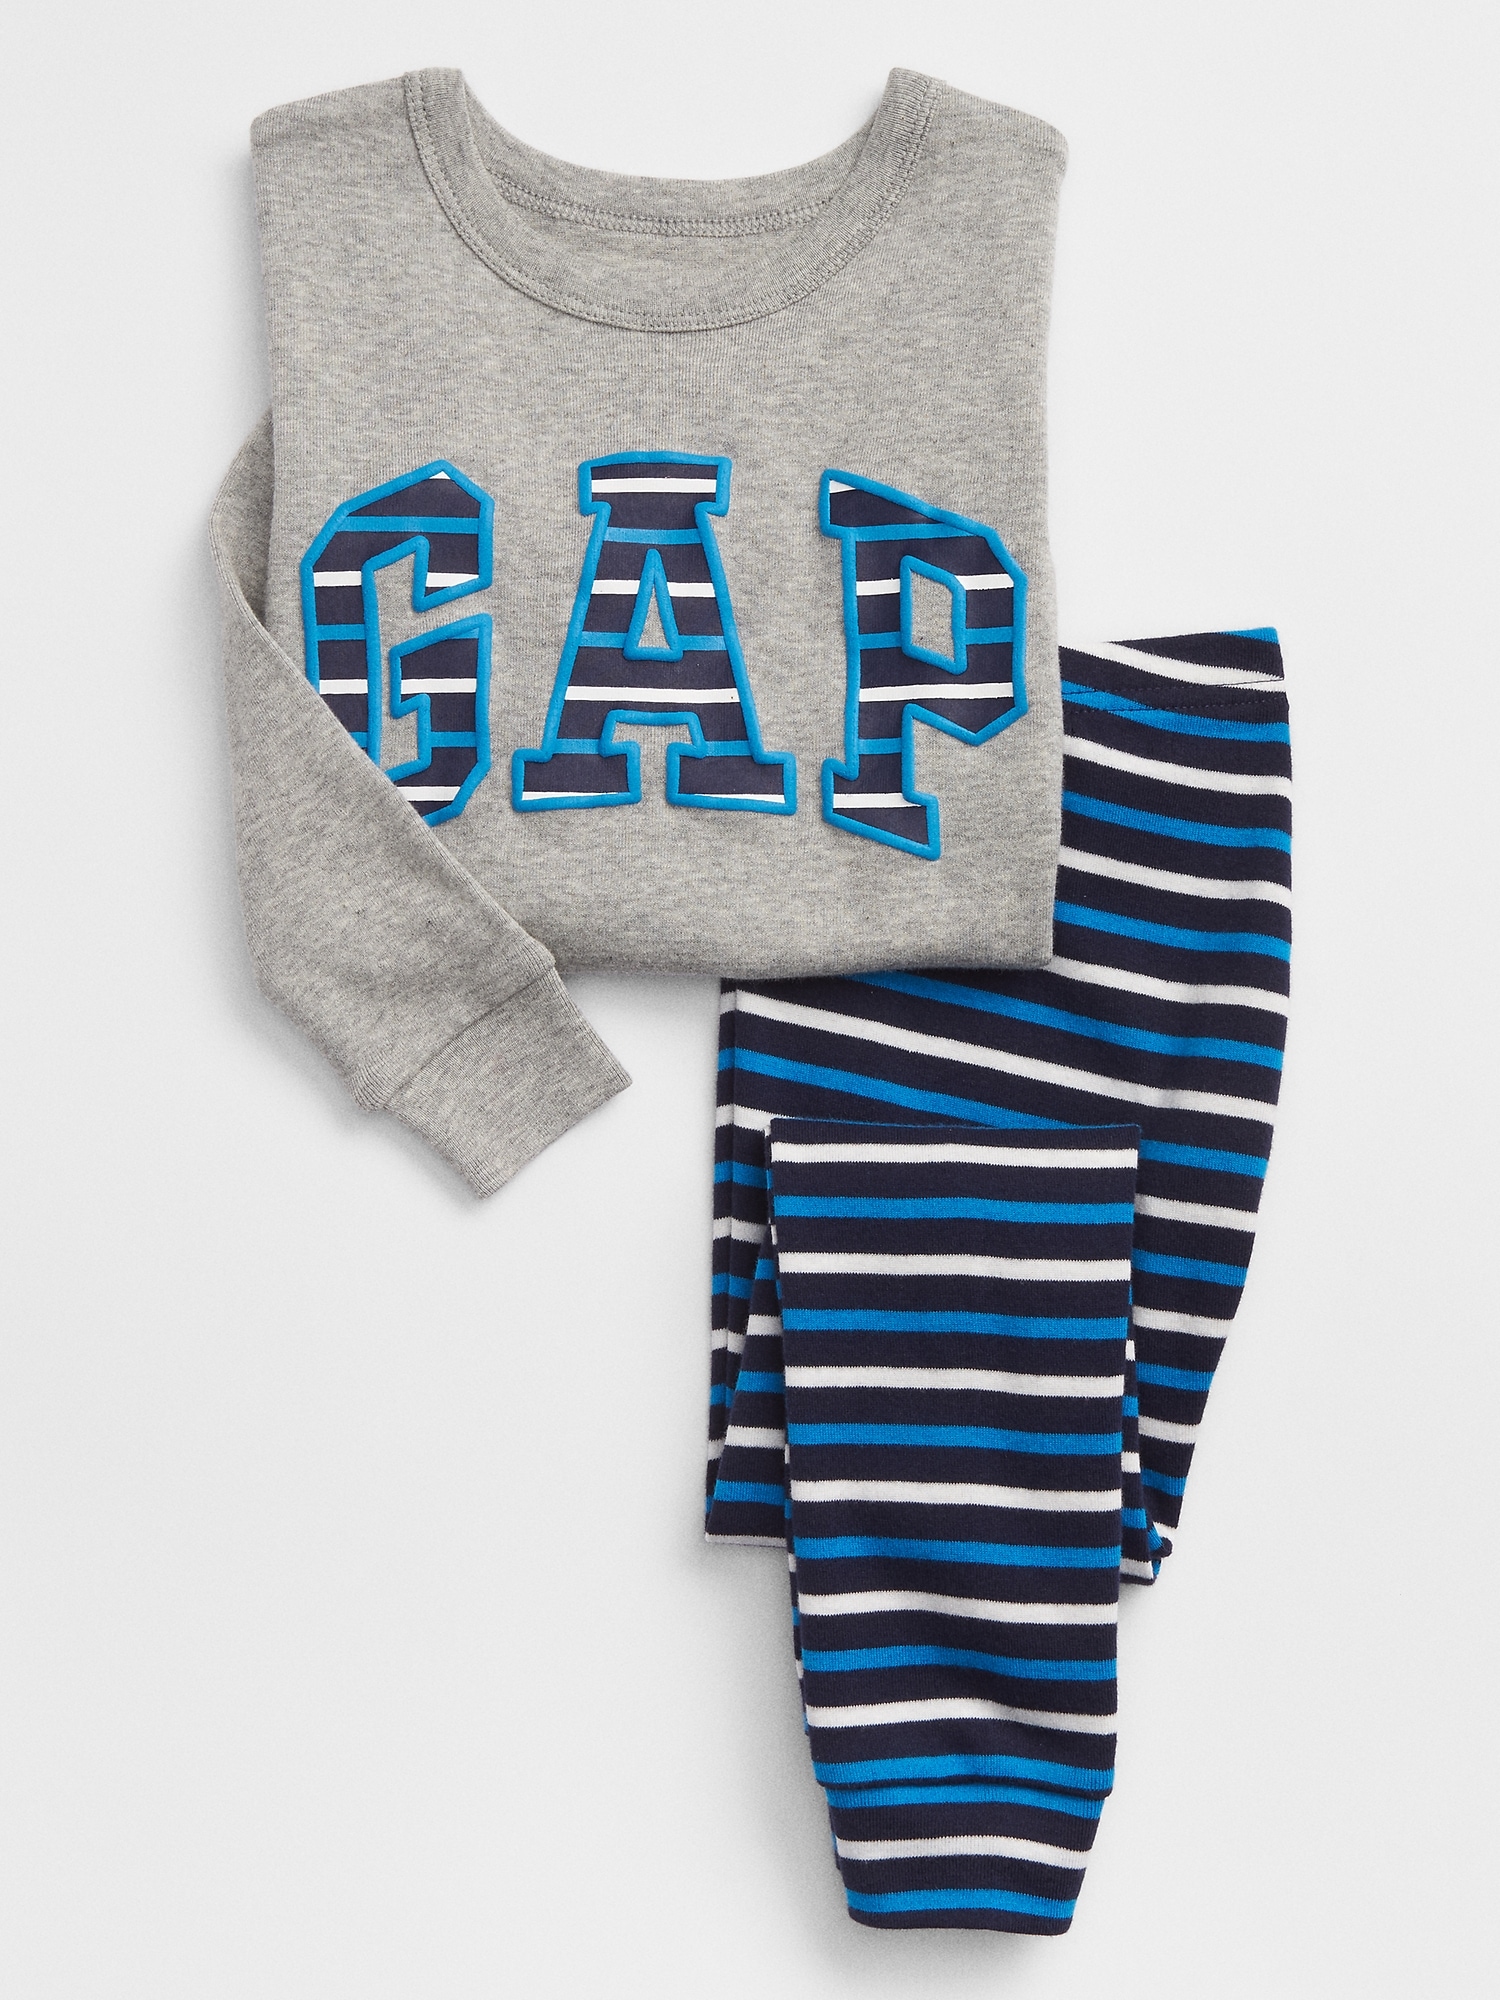 baby gap outlet near me